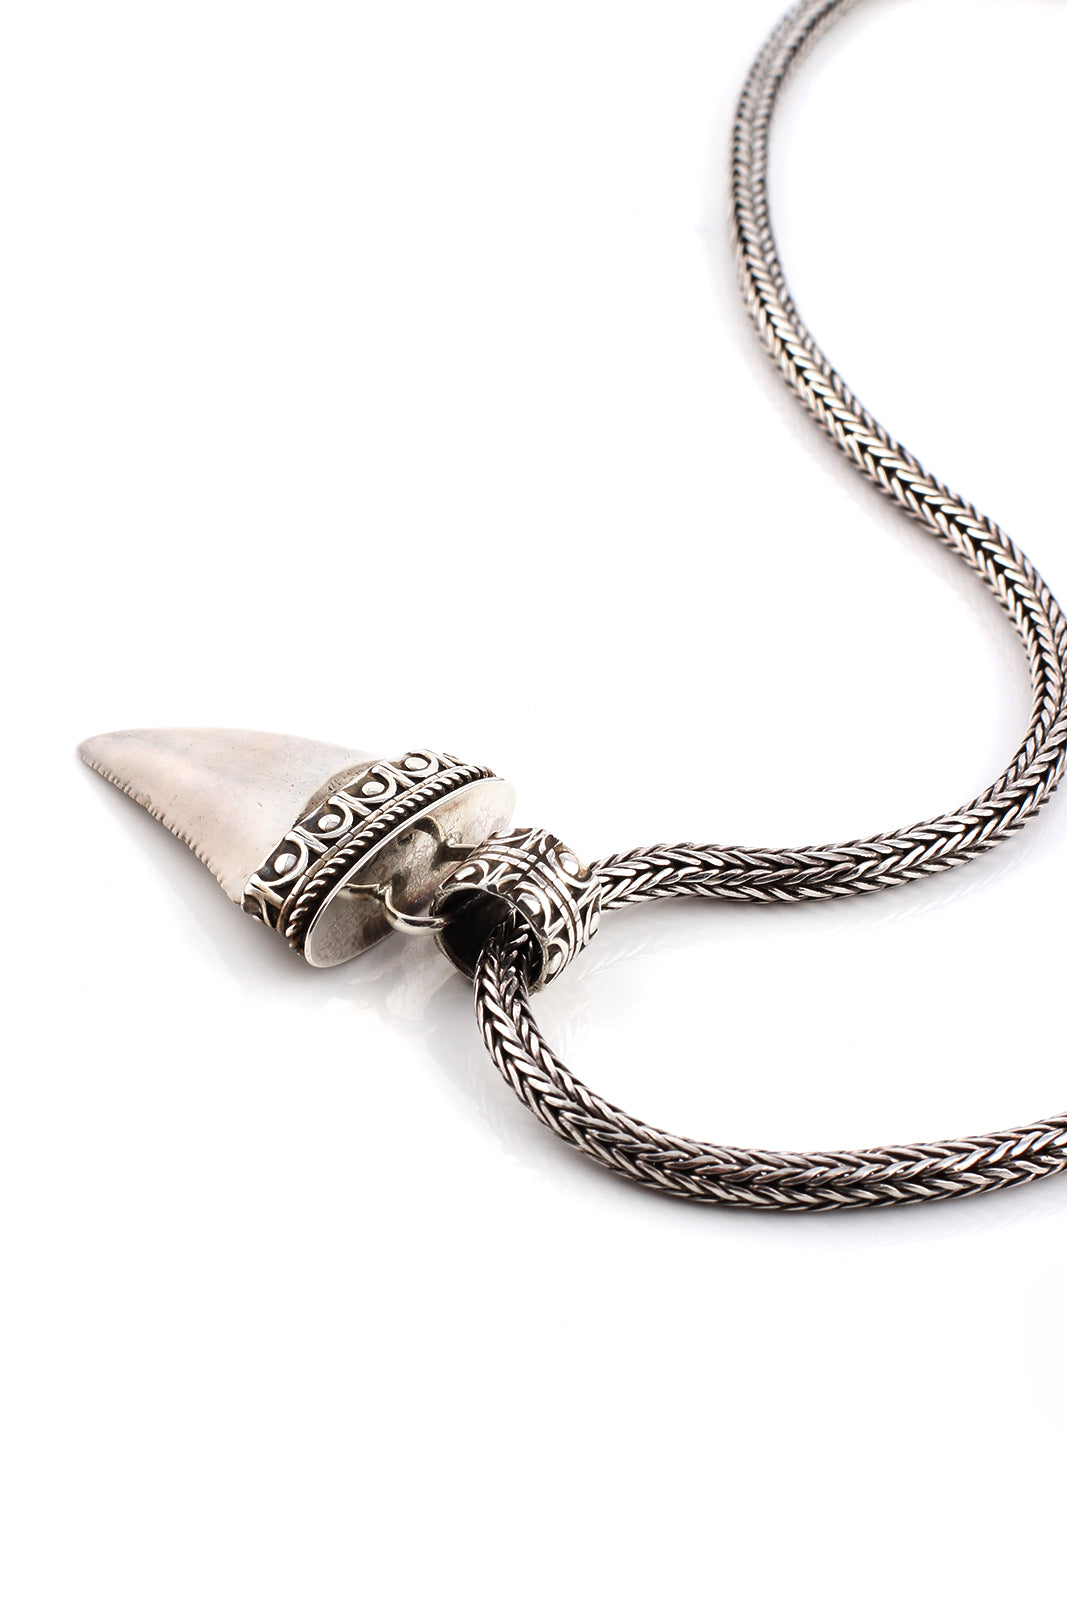 Fossilized Great White Shark Tooth Pendant – Silver Eagle Gallery Naples